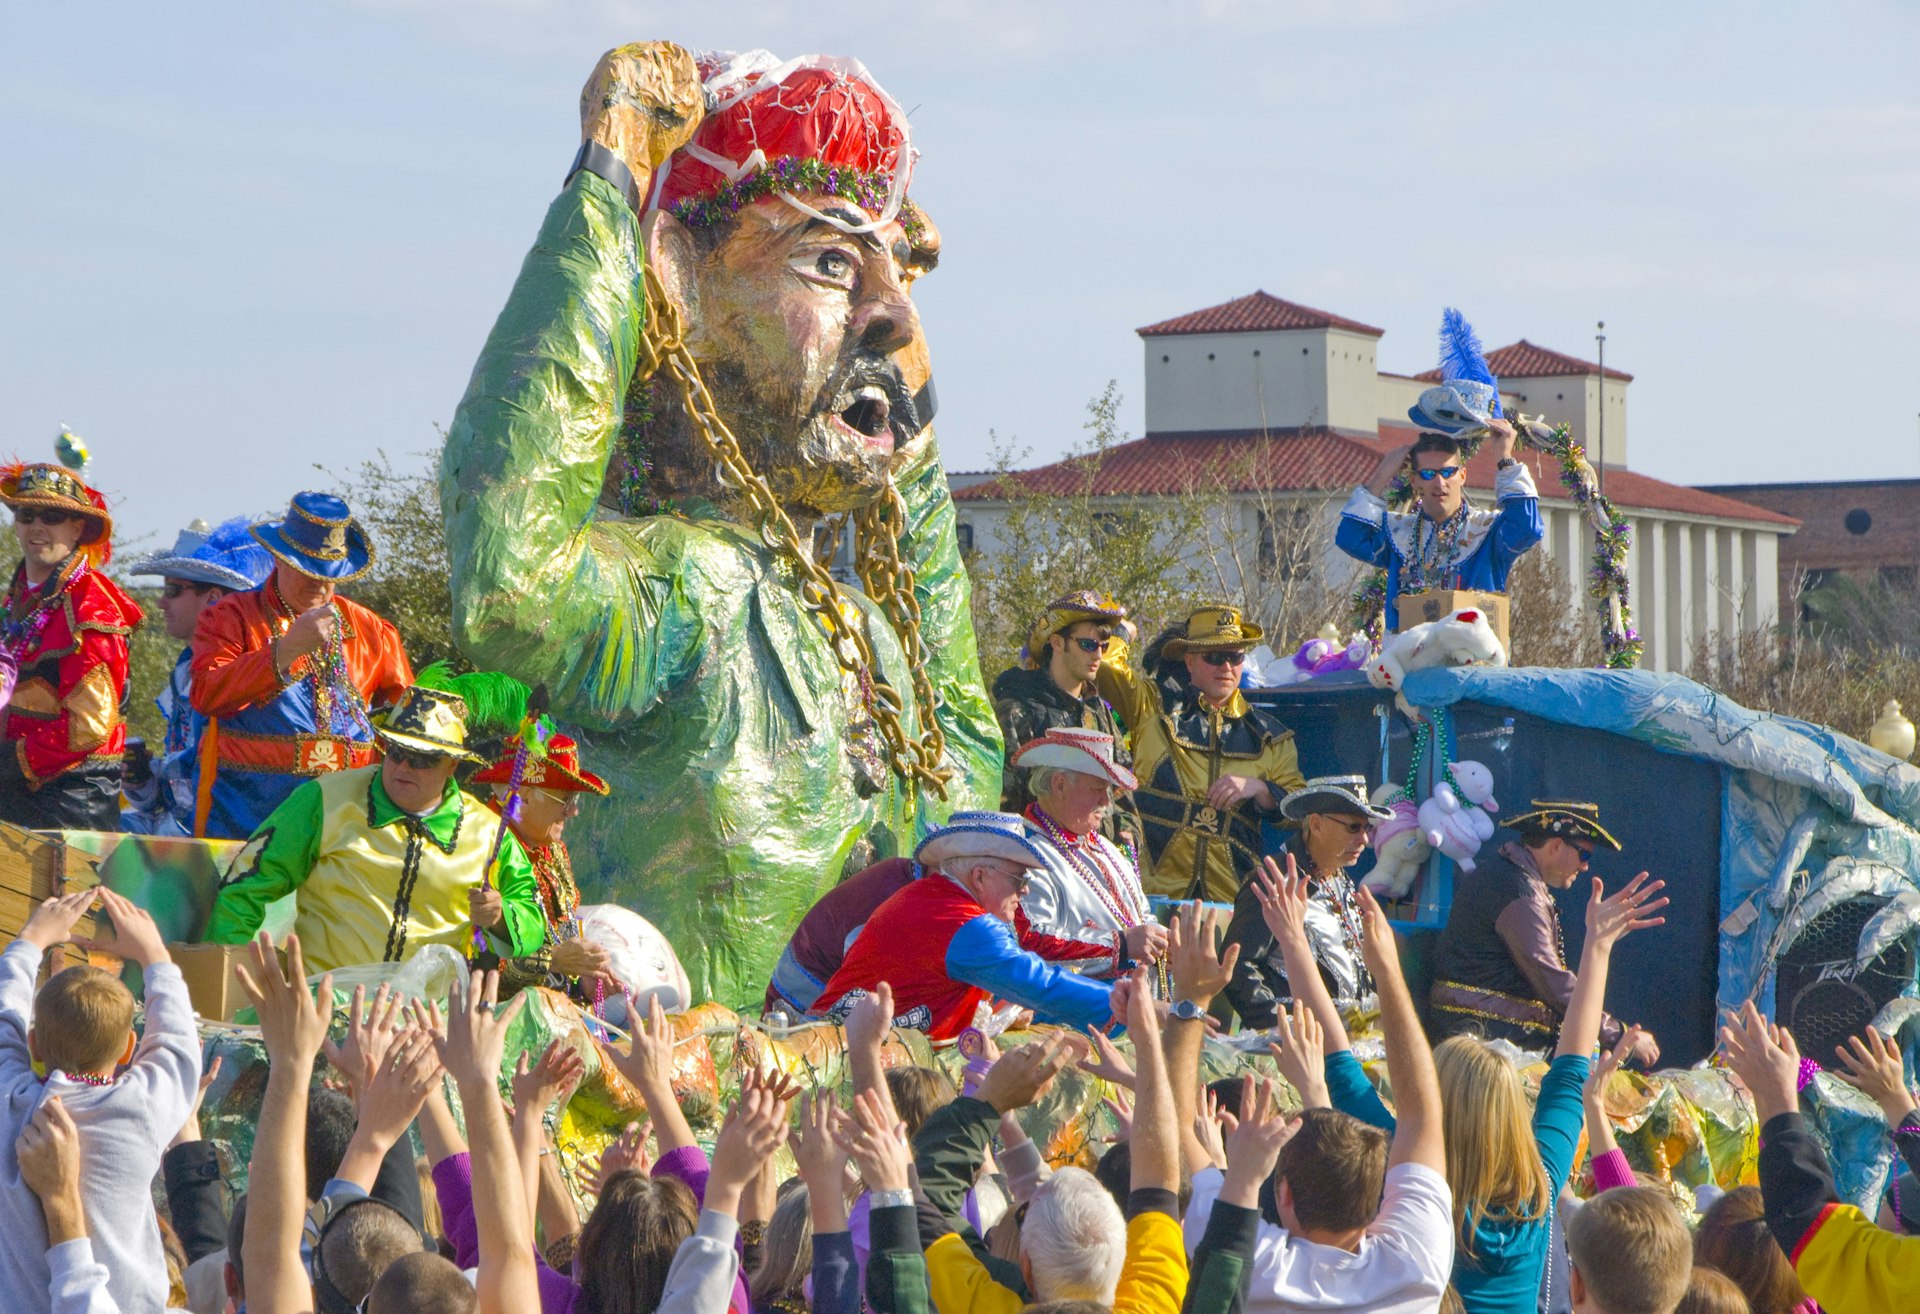 A float in a carnival has a large papier mache figure. People on the float are handing out mardi gras beads to revellers 